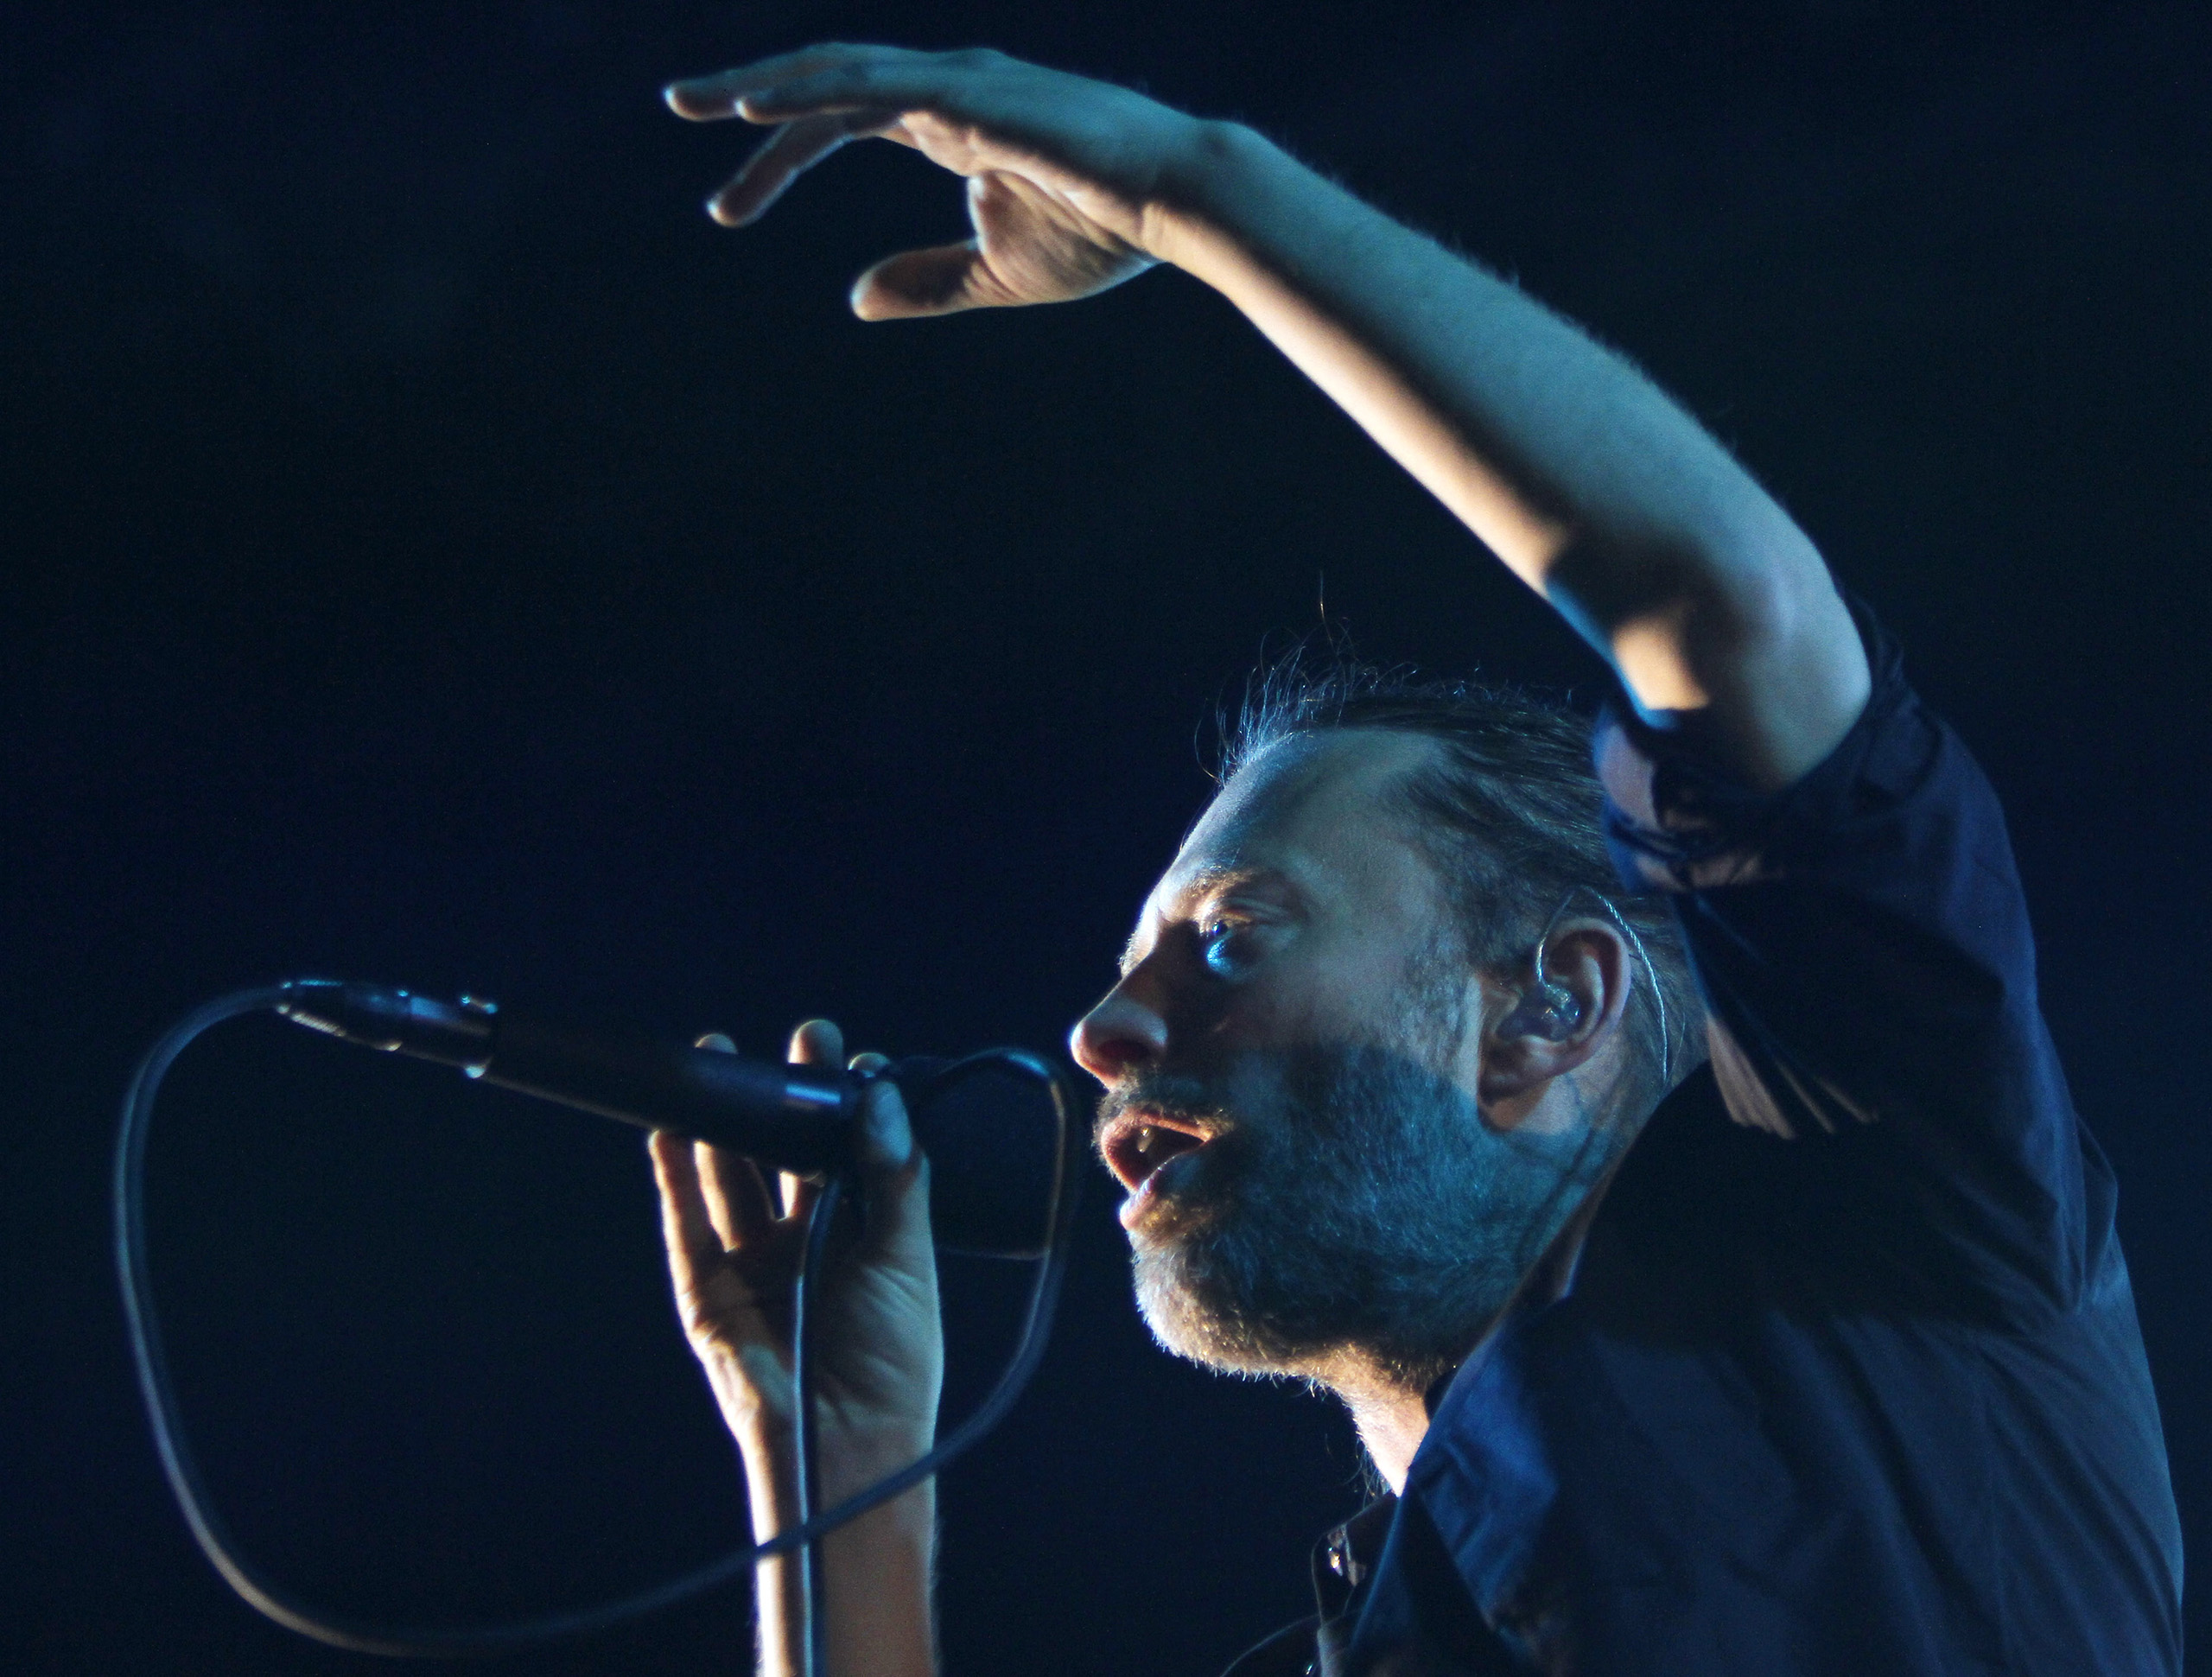 Thom Yorke of British band Radiohead performs at the Optimus Alive Festival in Alges, on the outskirts of Lisbon July 15, 2012. (Hugo Correia—Reuters)